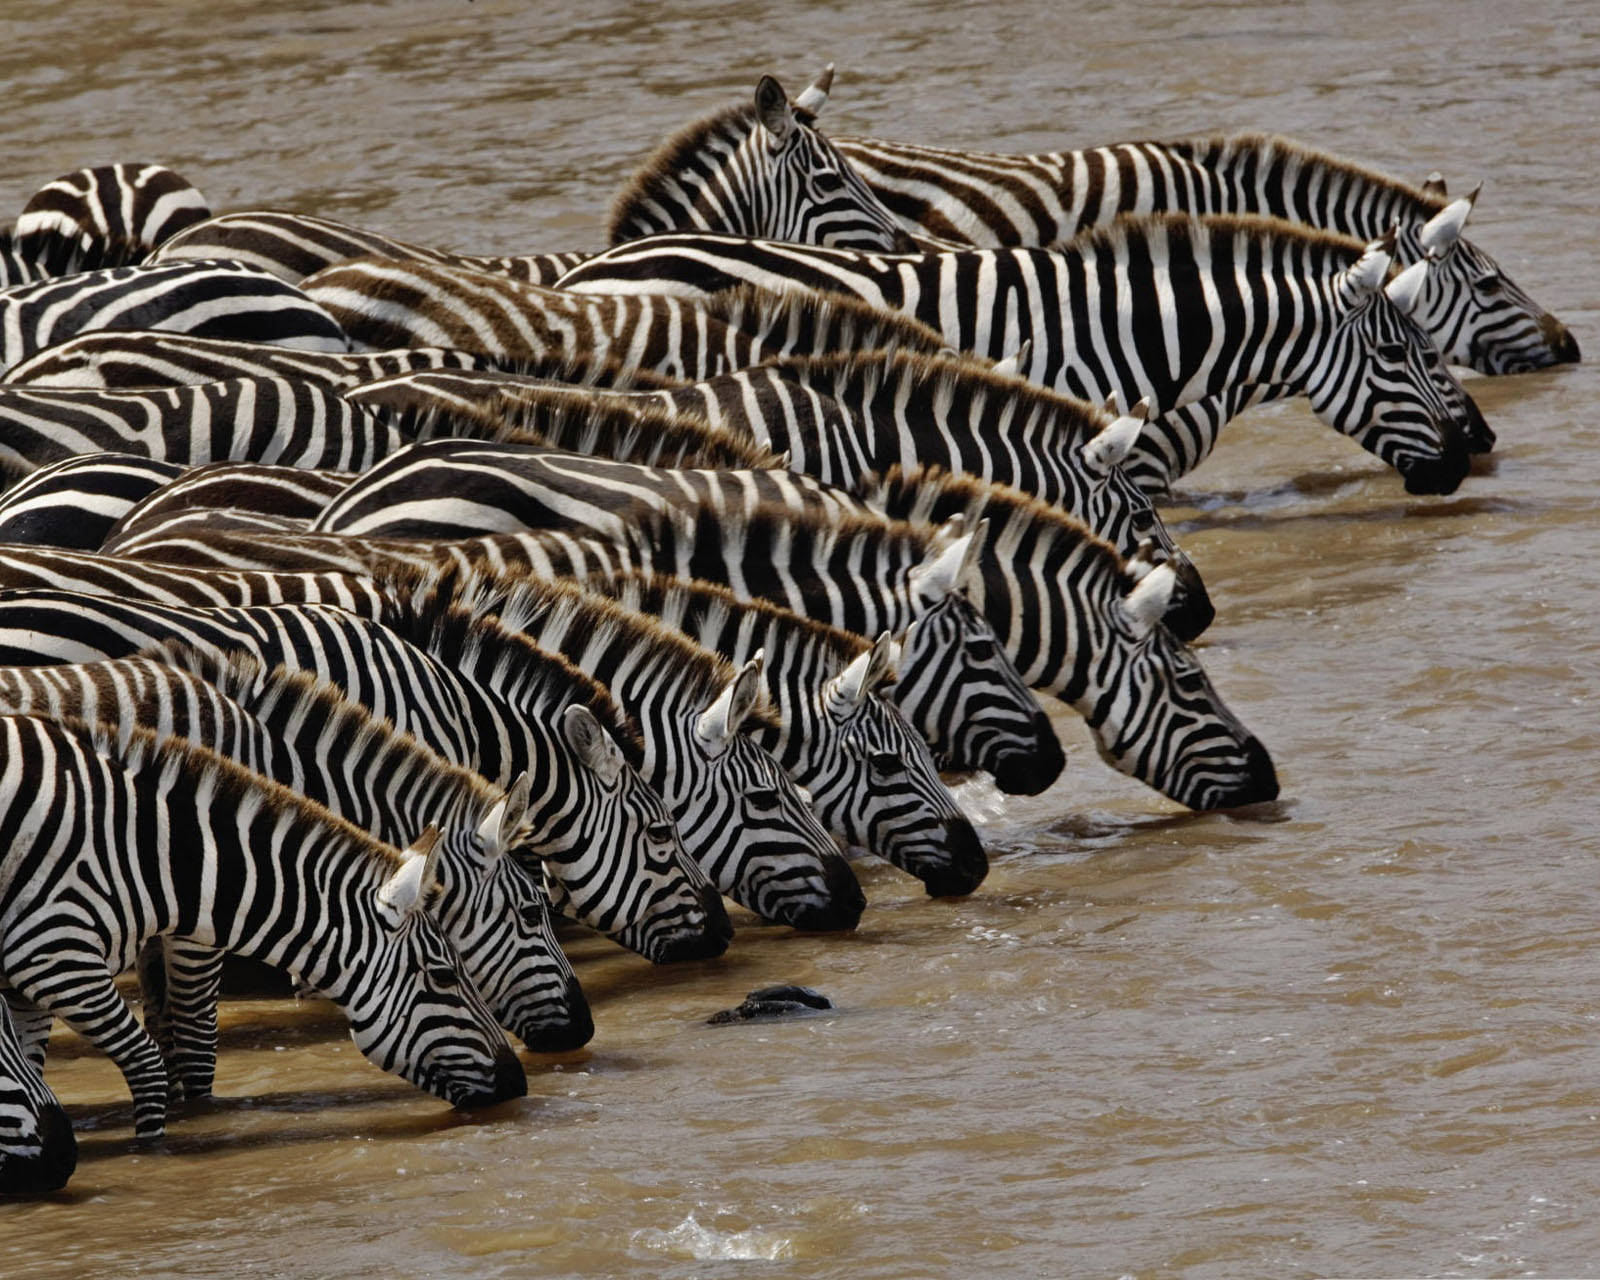 Group Of Zebras Drinking Water Background